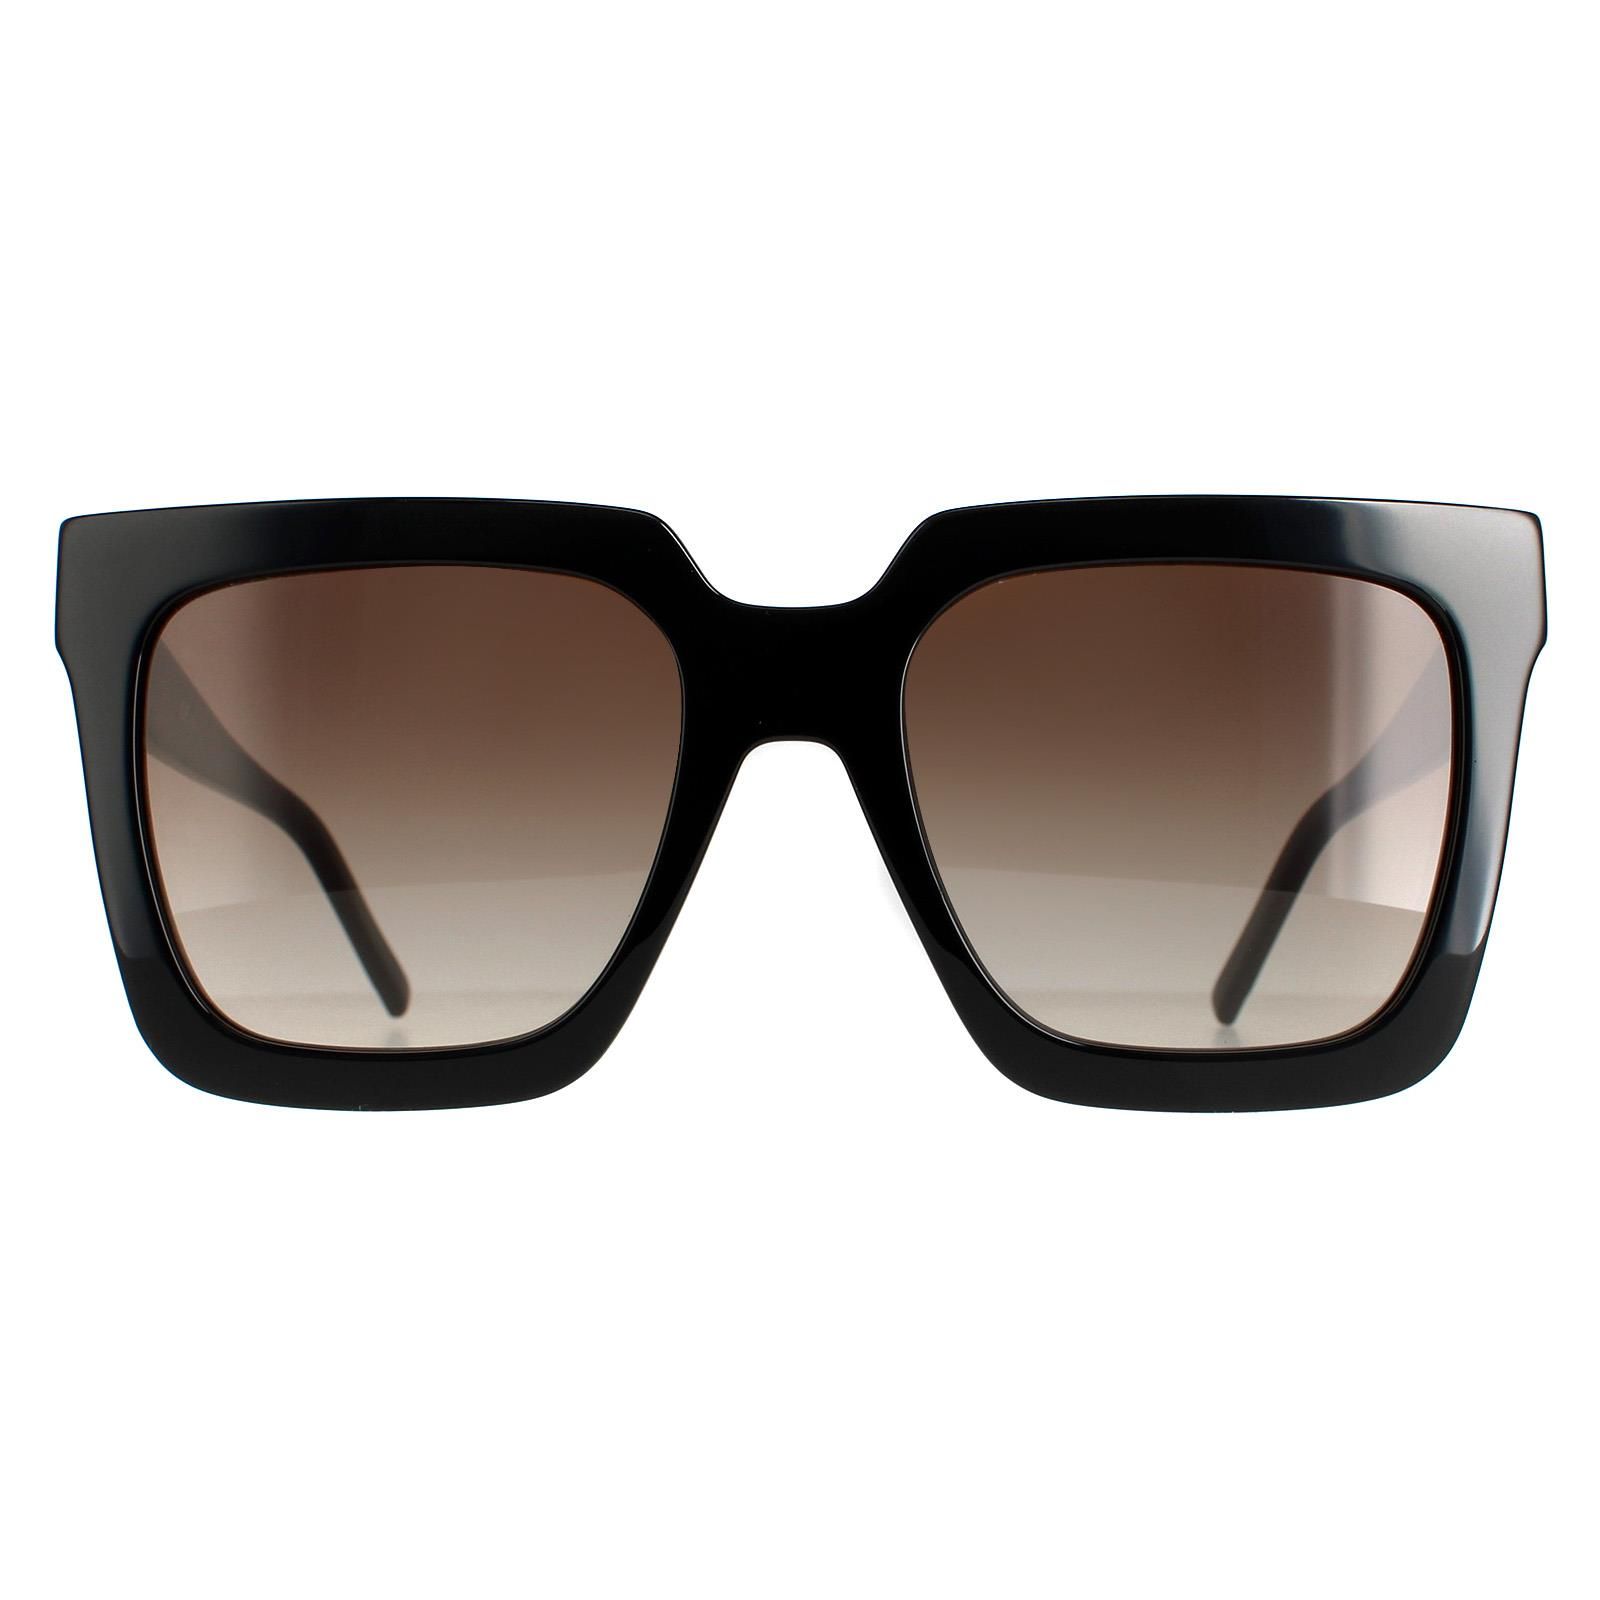 Hugo Boss Square Womens Black Brown Gradient BOSS 1152/S  Hugo Boss are a super oversized chic square design made from lightweight plastic with metal Hugo Boss branding on the temples.